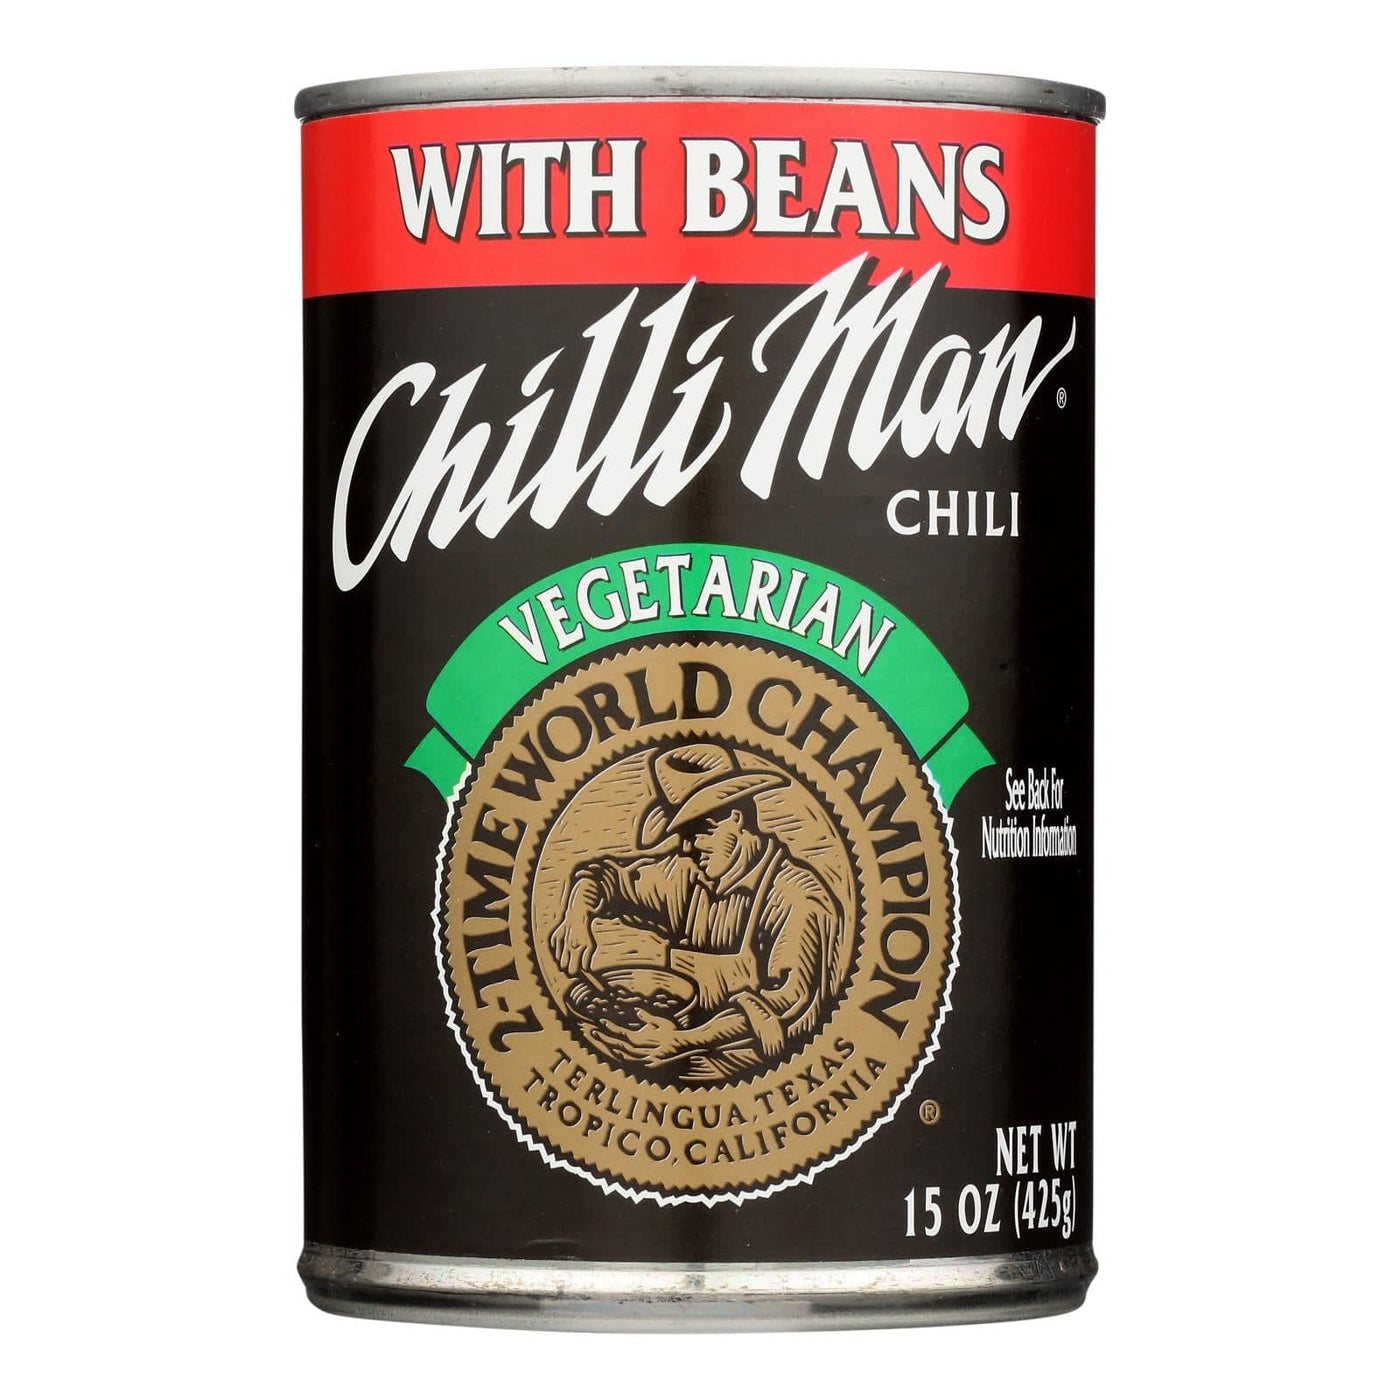 Chilli Man Vegetarian Chili With Beans - Case Of 12 - 15 Oz | OnlyNaturals.us